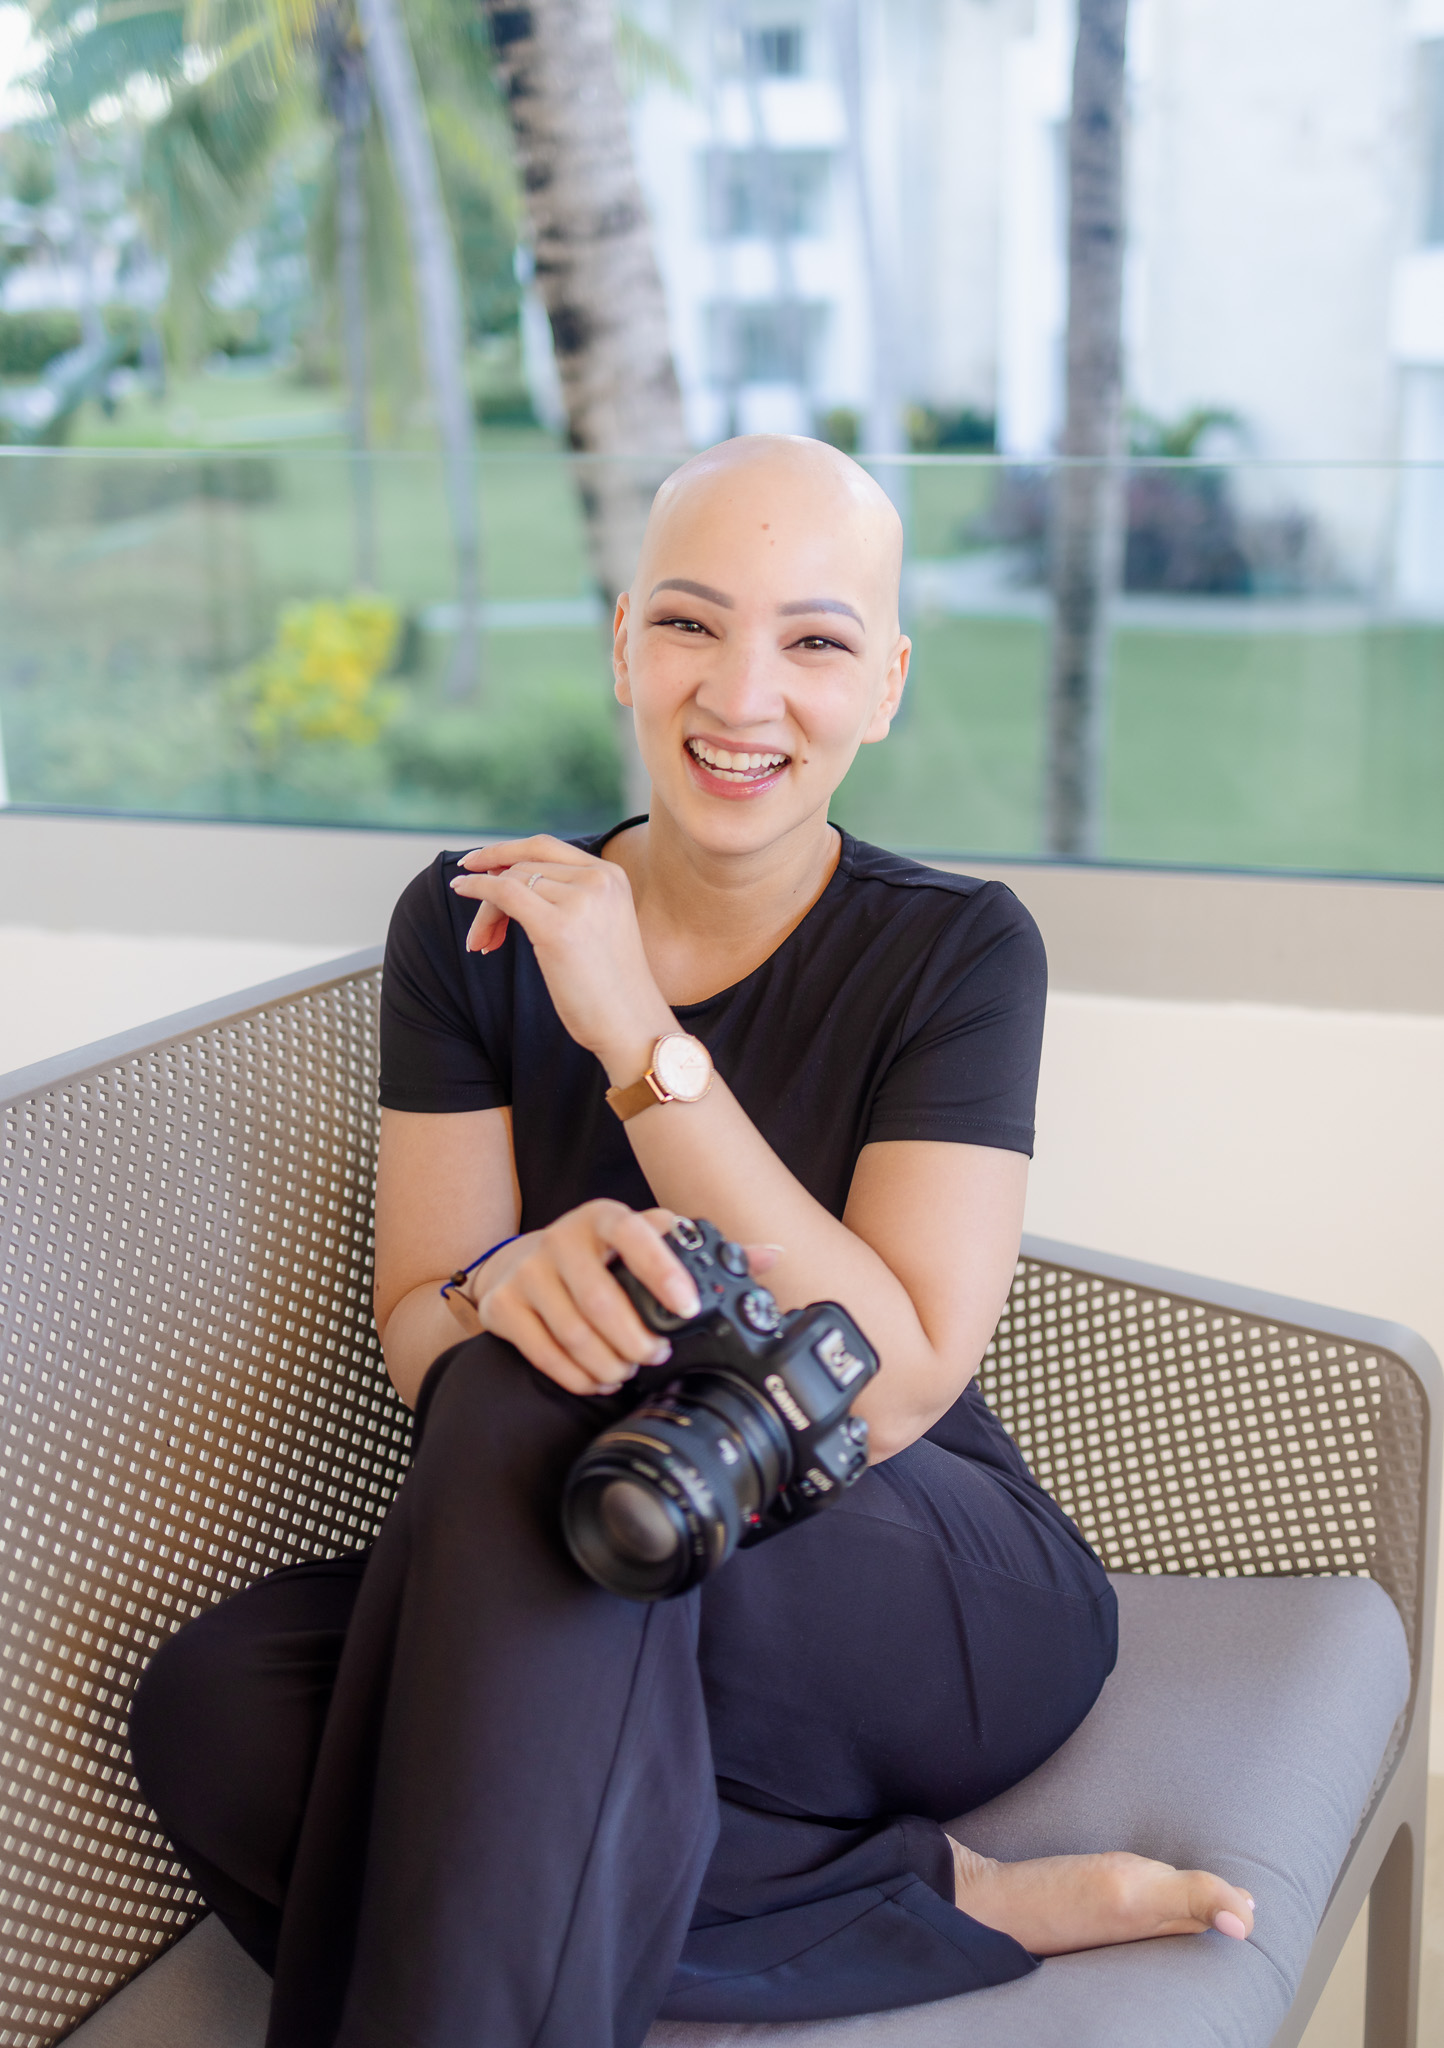 Photo of a smiling bald woman holding a camera in a casual pose